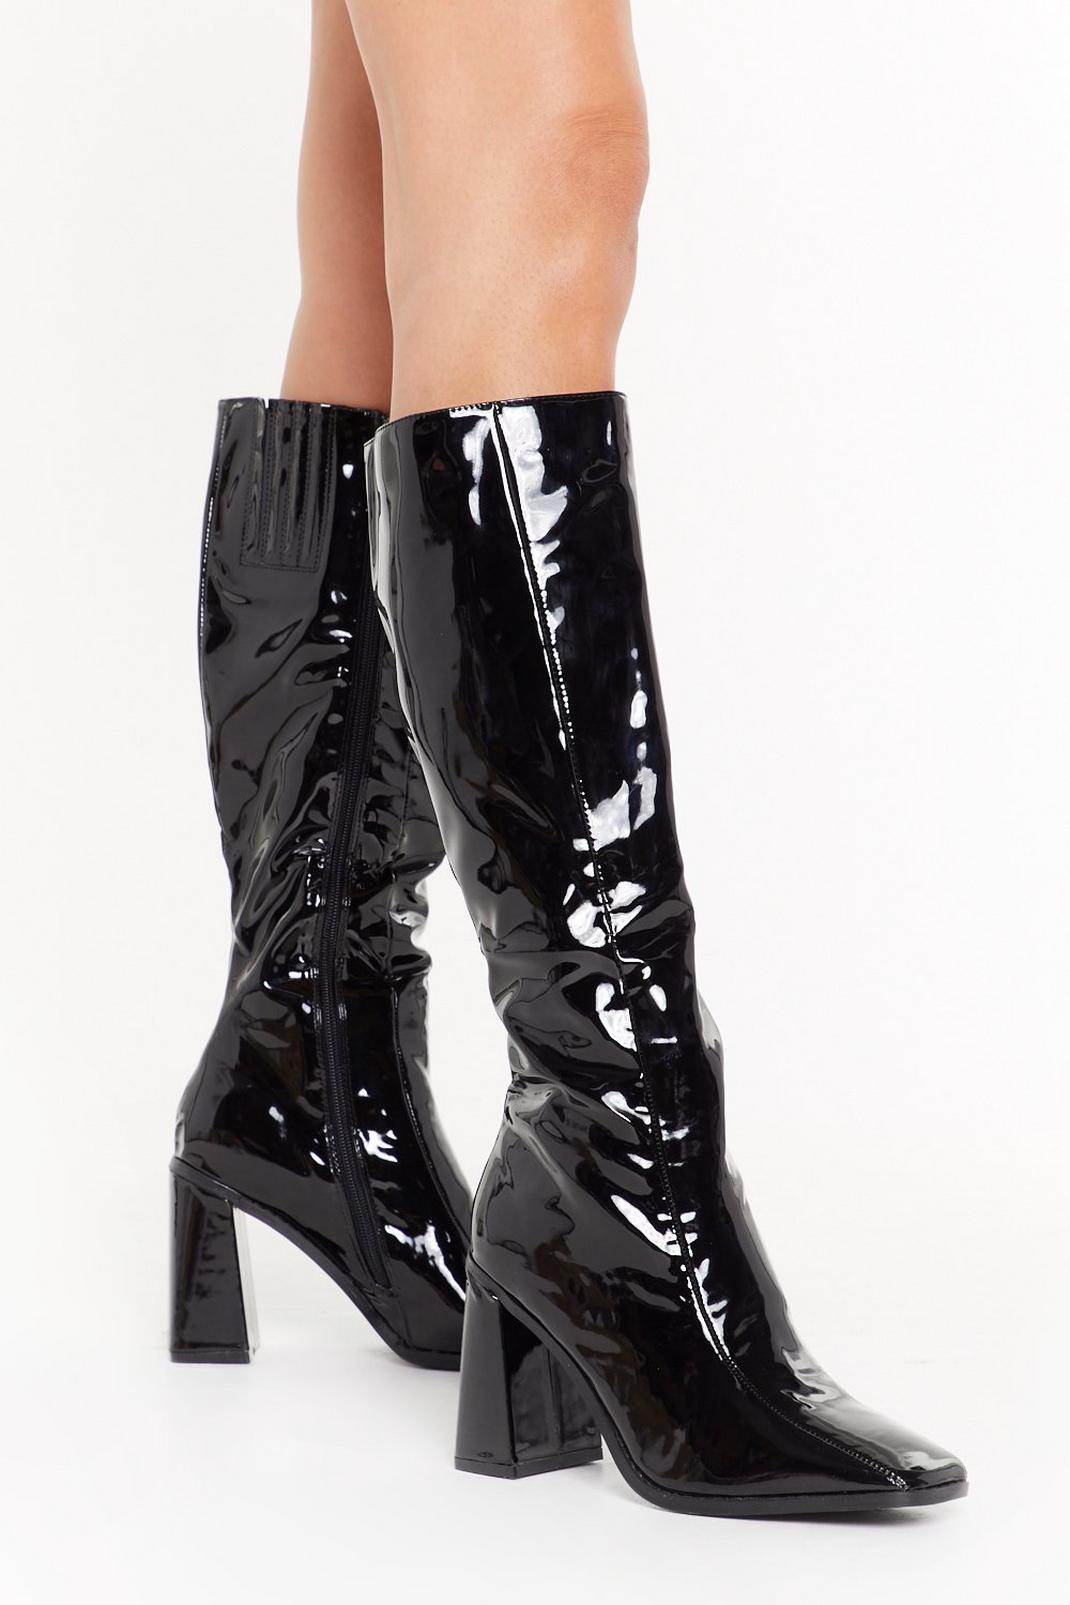 Flare for Dramatics Square Toe Patent Knee High Boots image number 1